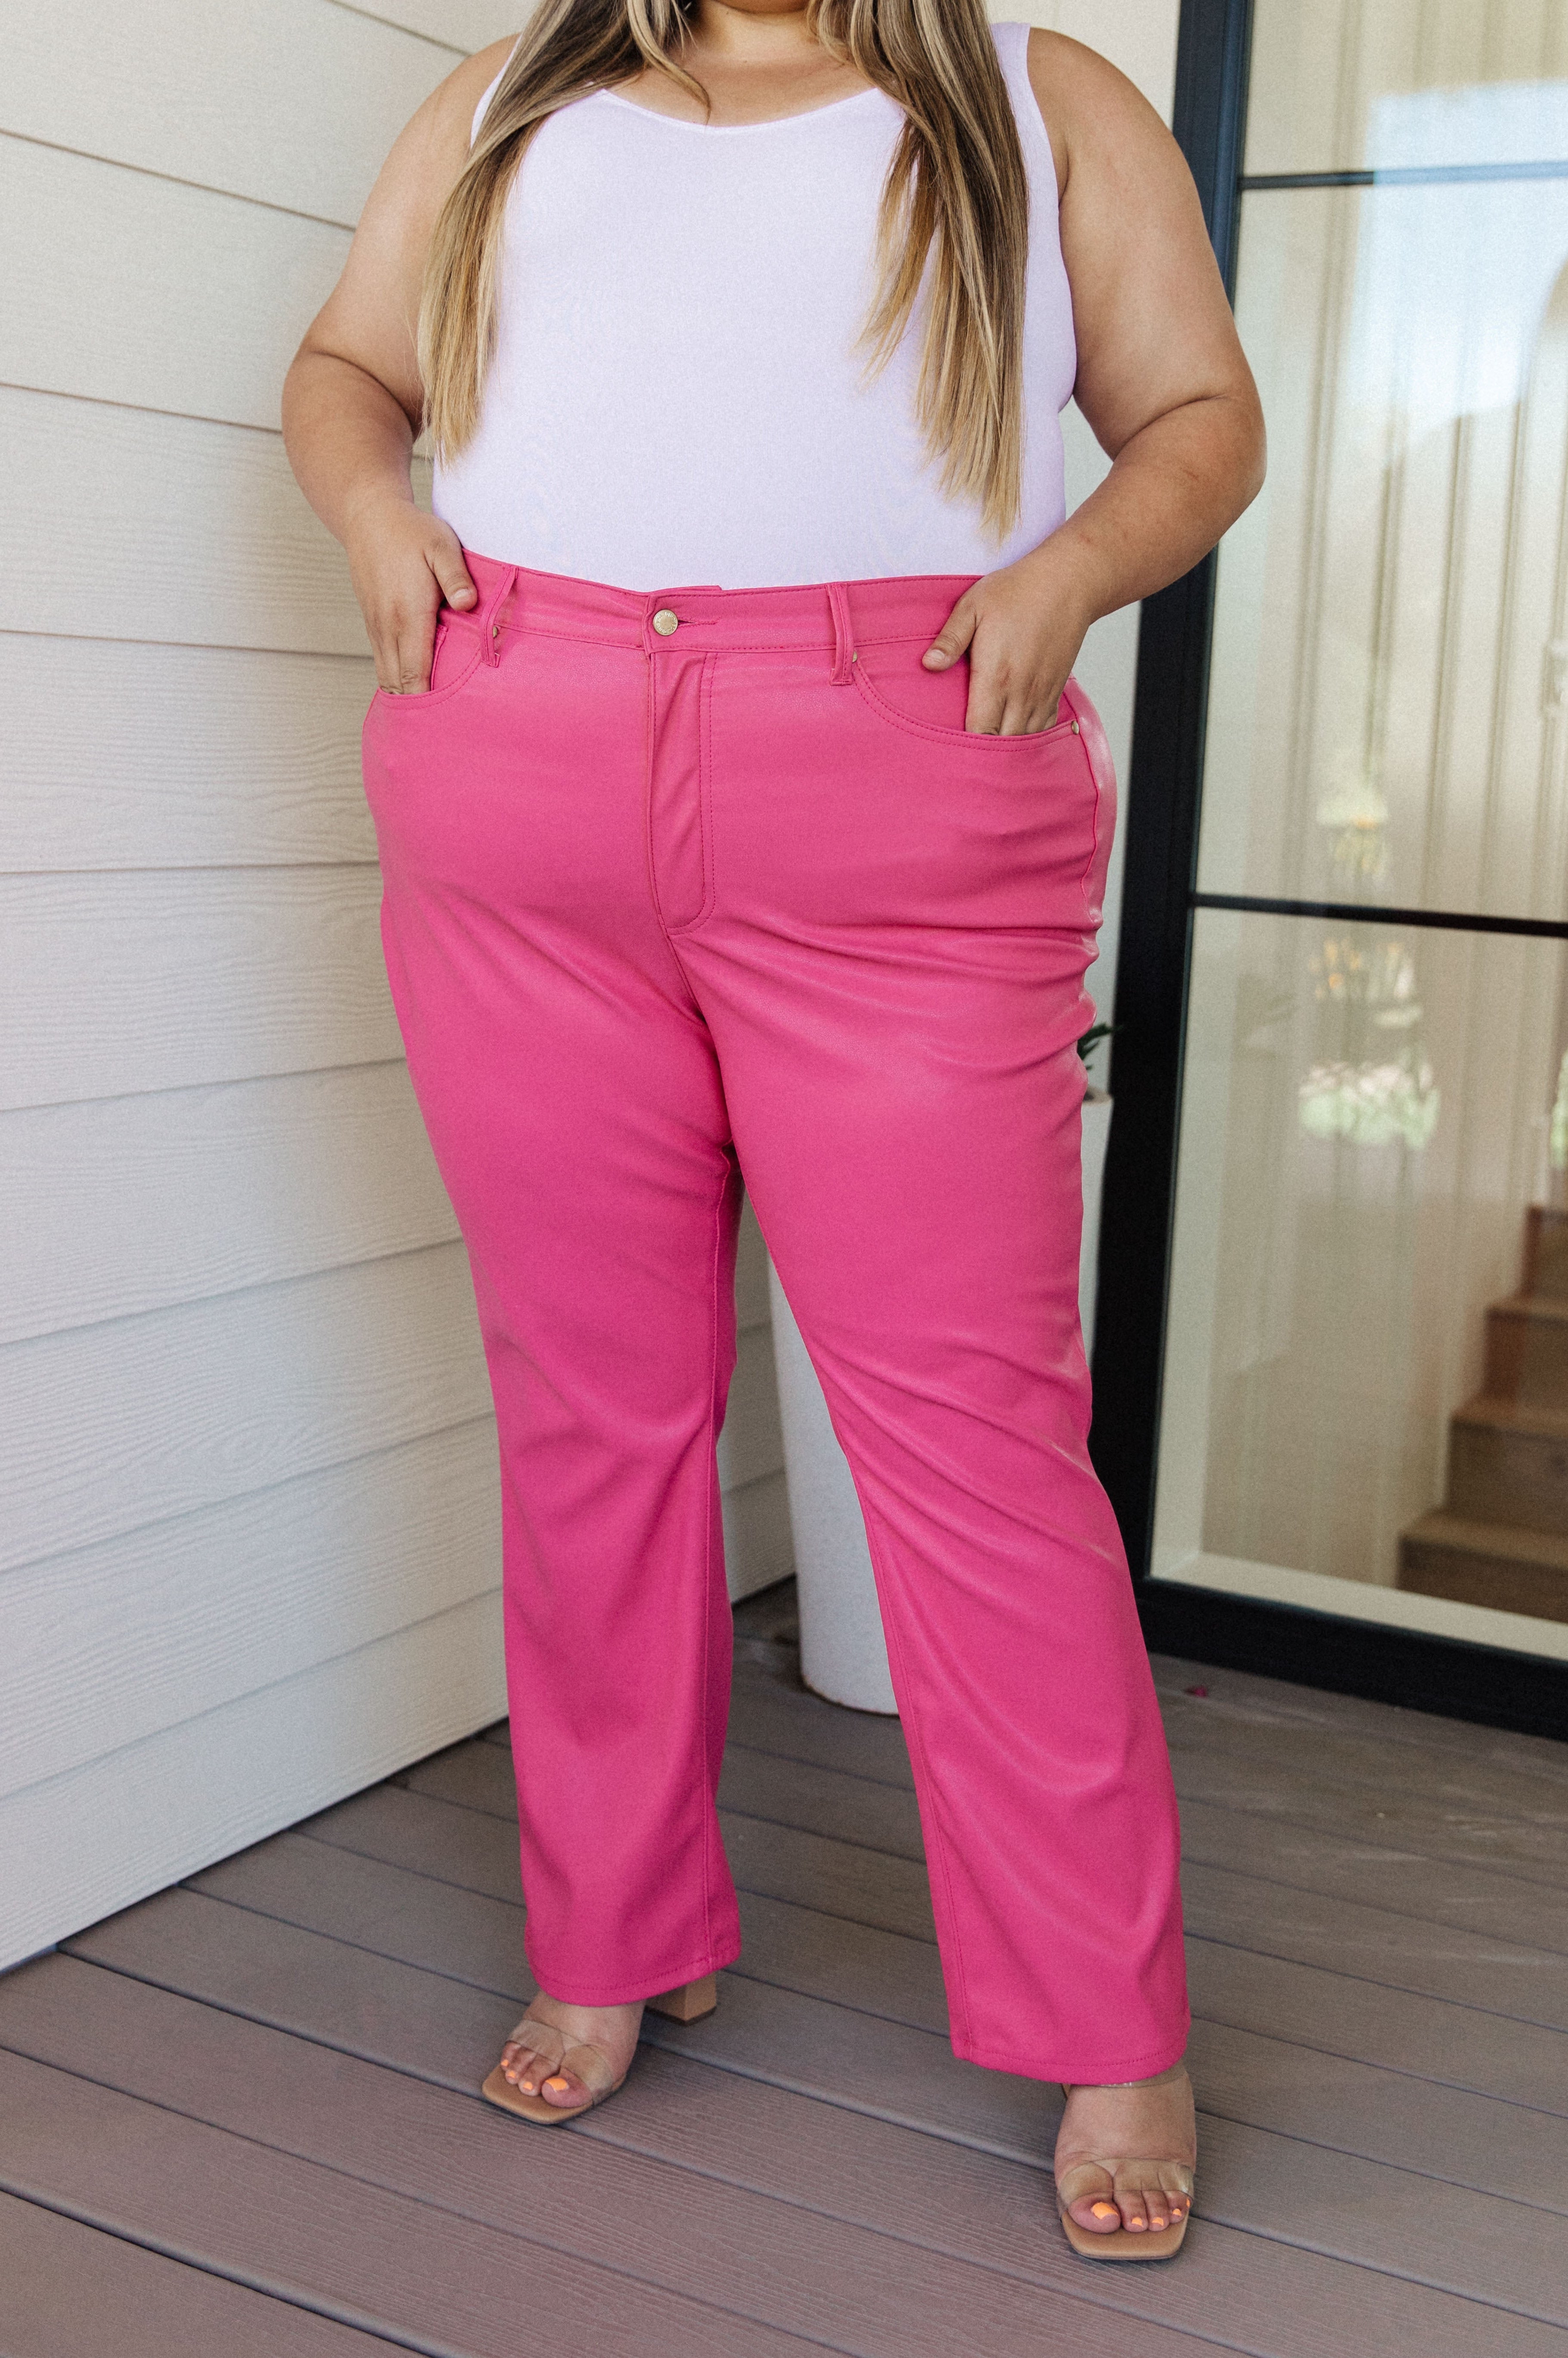 Tanya Control Top Faux Leather Pants in Hot Pink |   |  Casual Chic Boutique